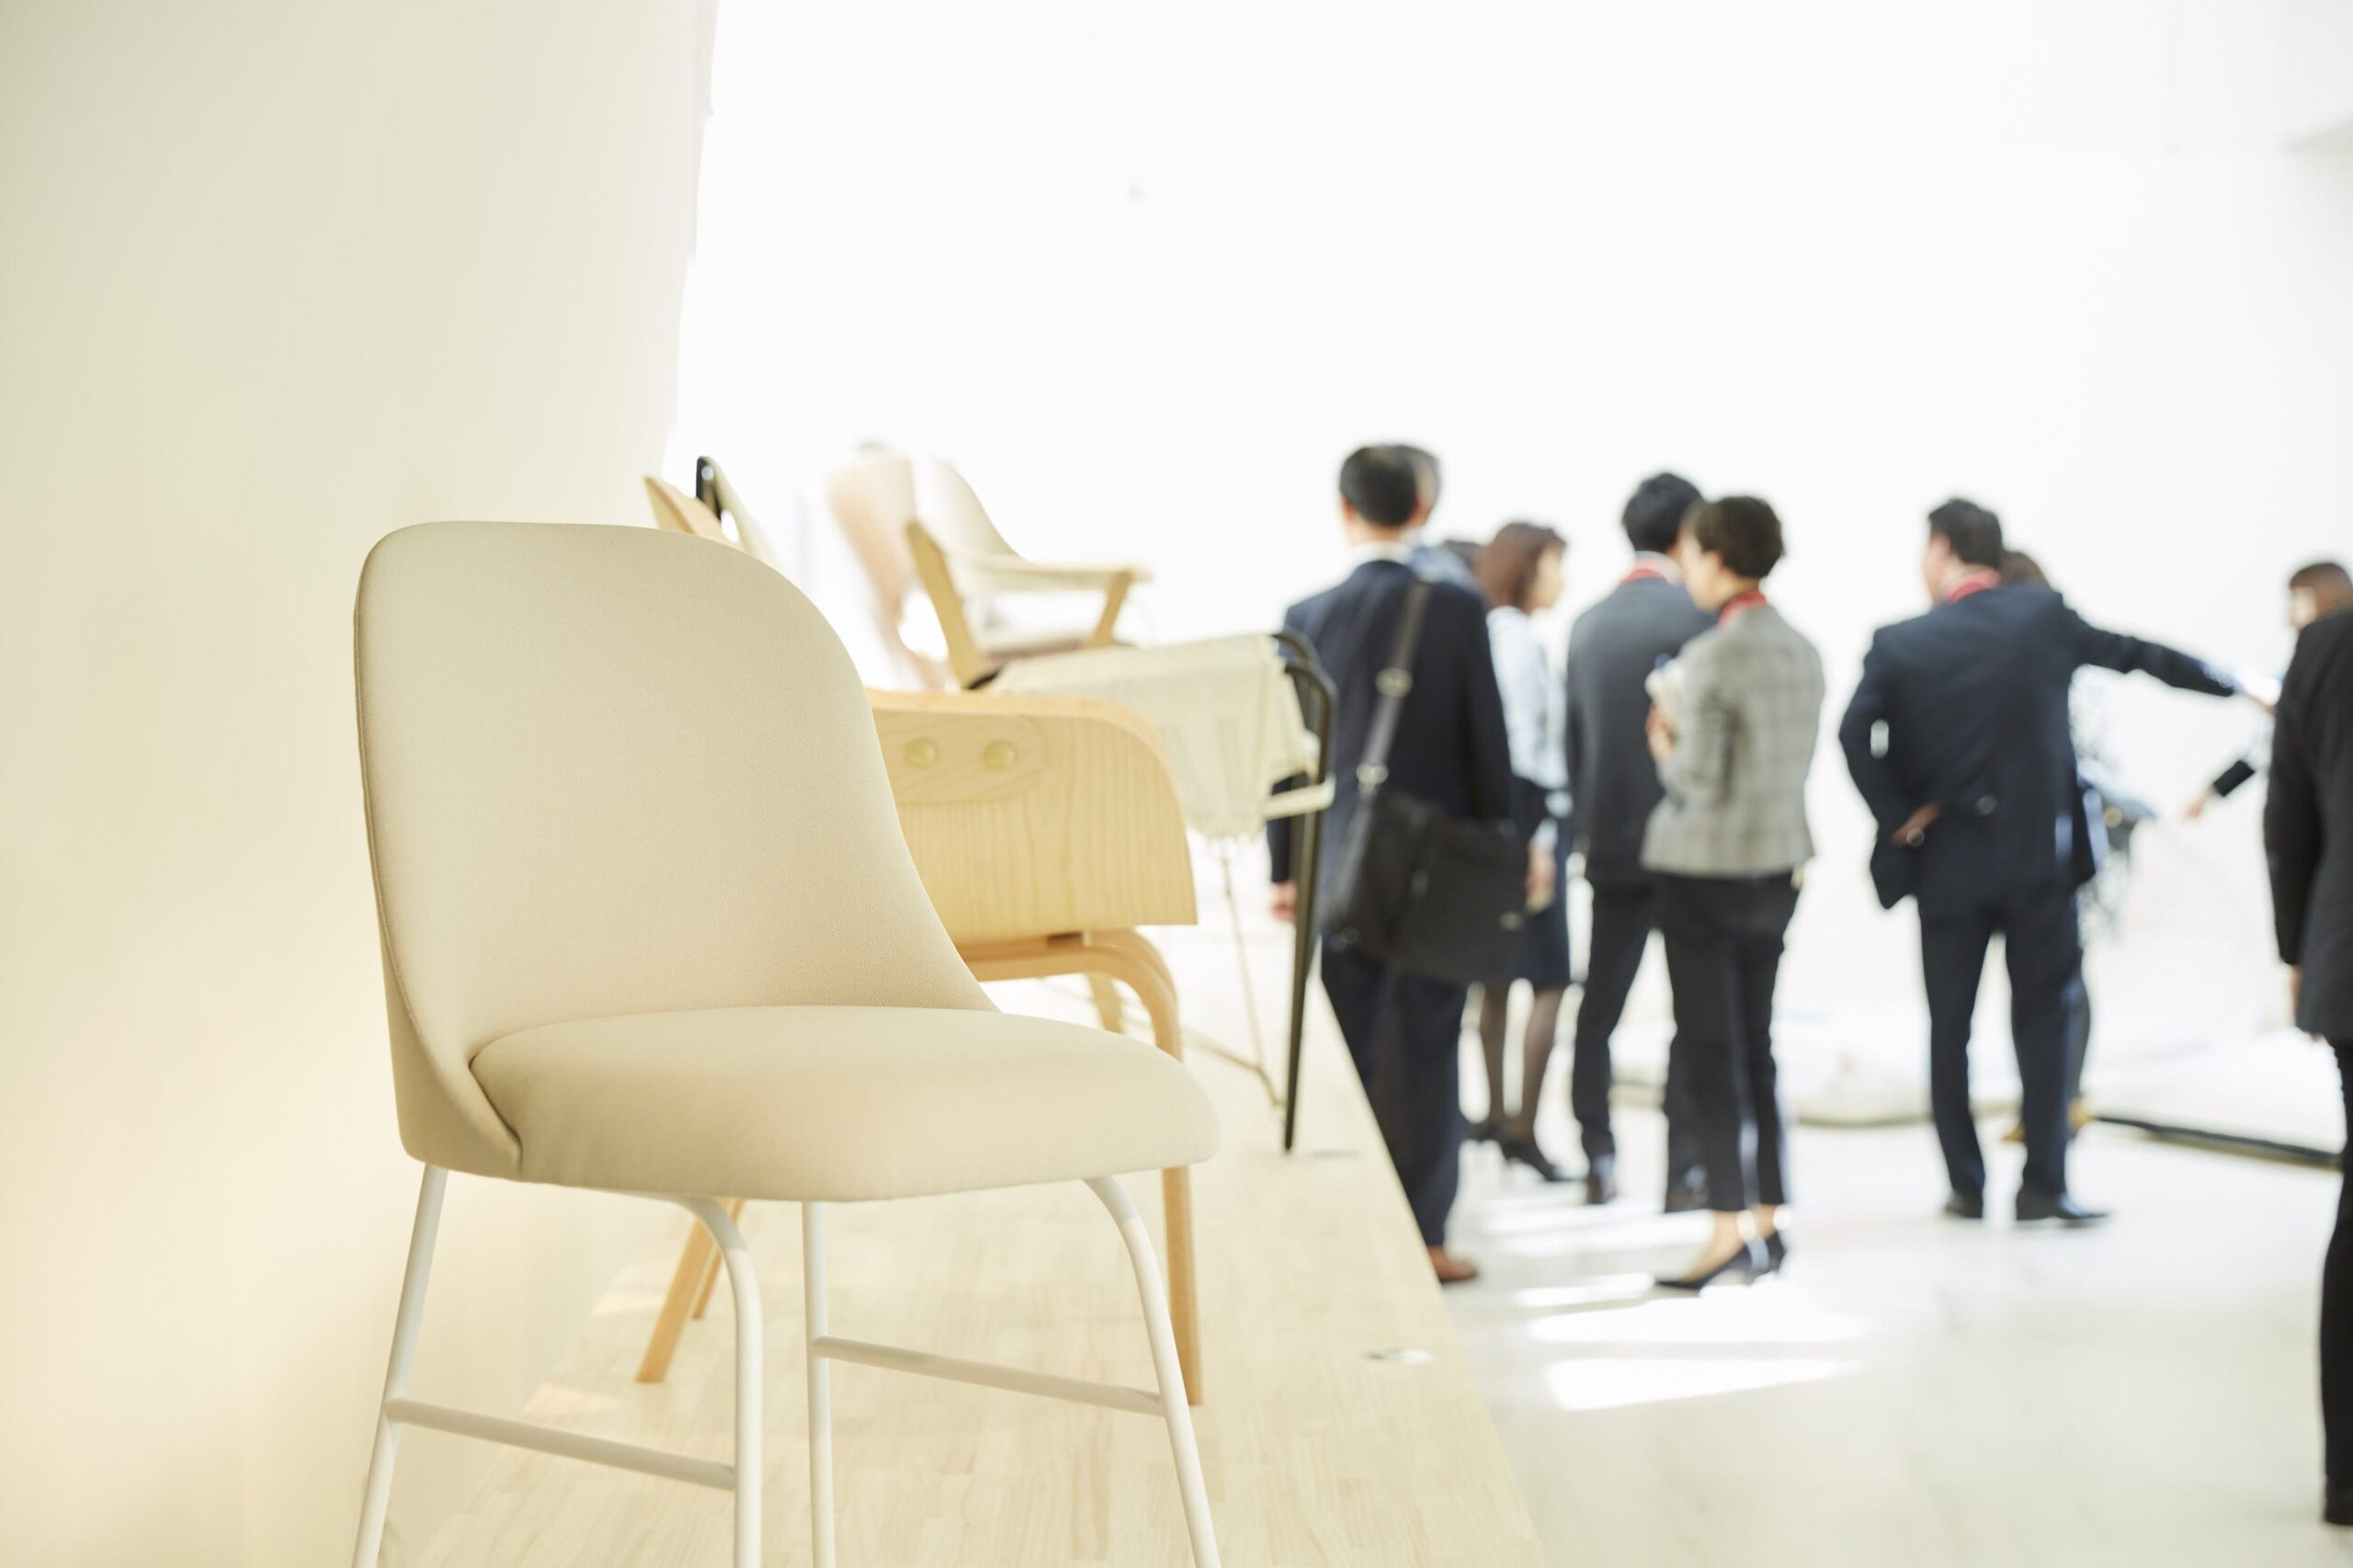 ‘The Next Simplicity – Rediscovering the Basics’ exhibition in Tokyo